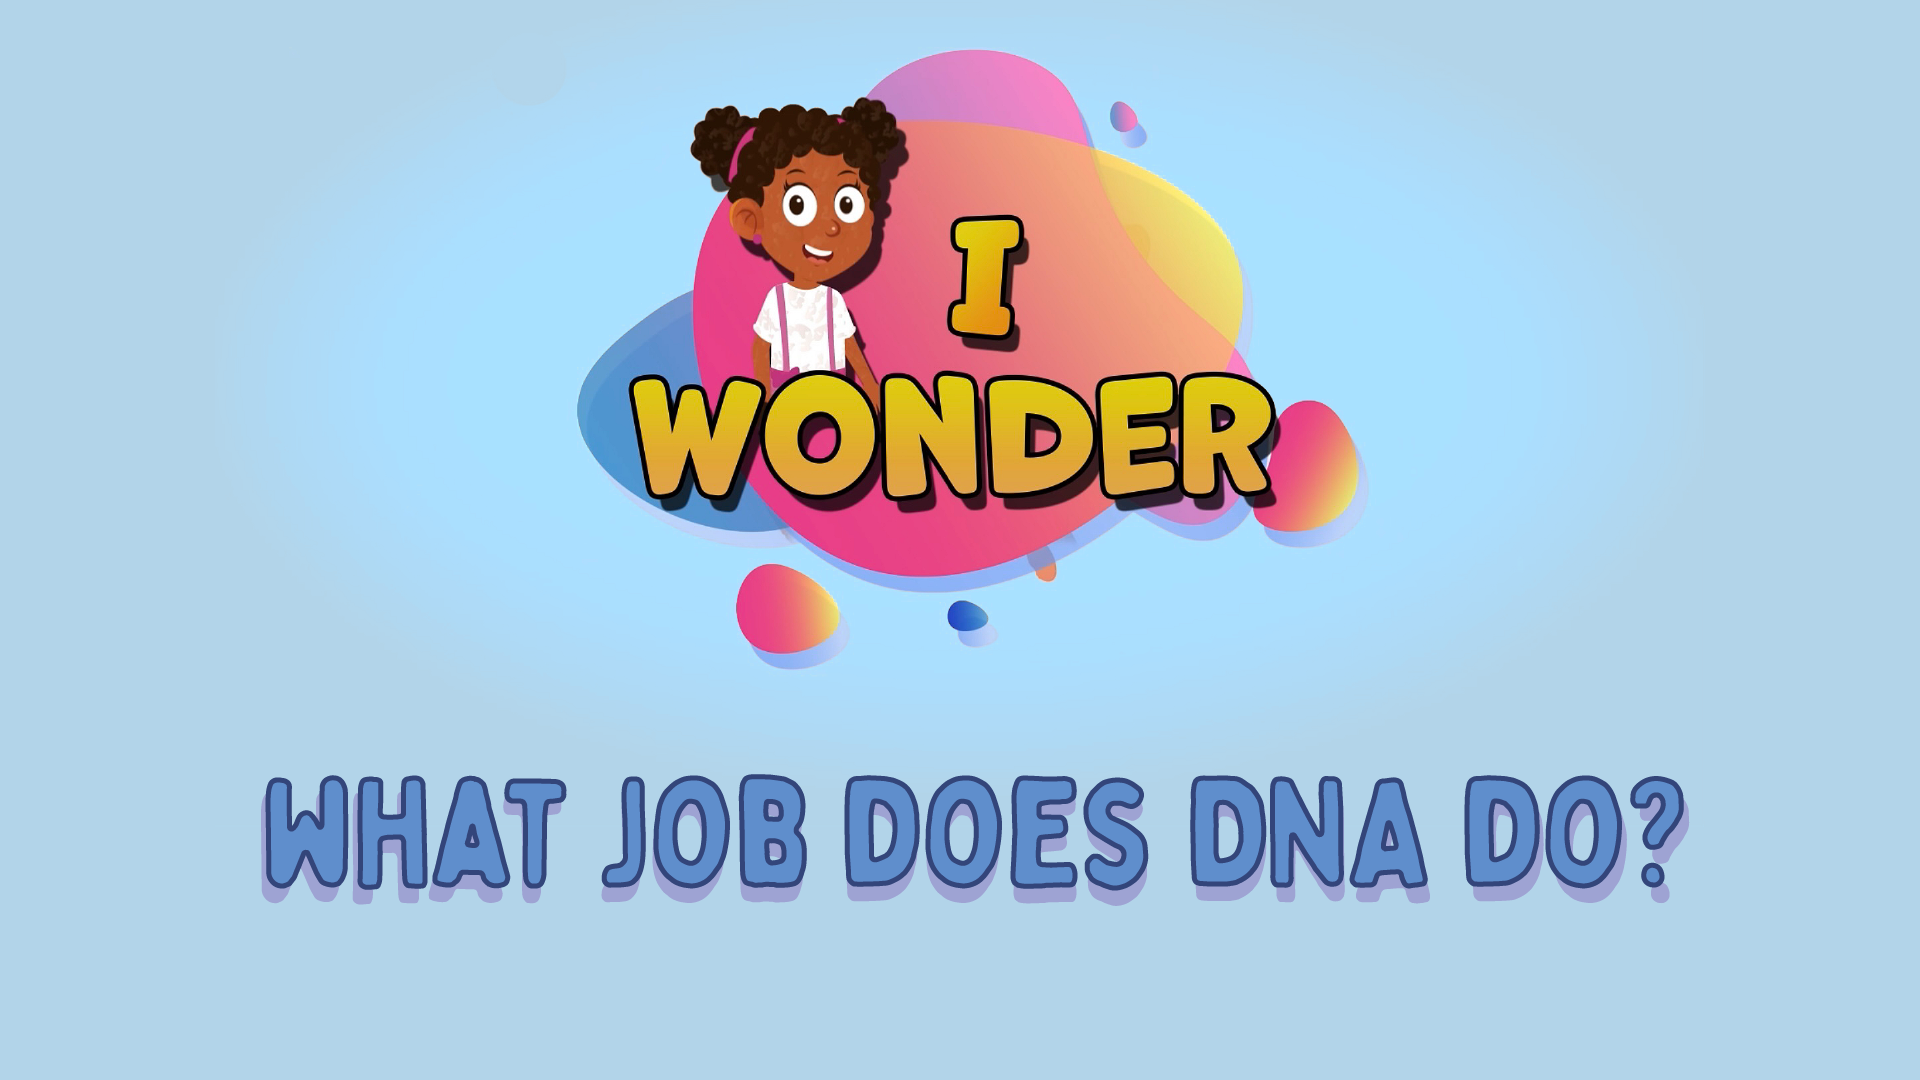 What Job Does DNA Do?